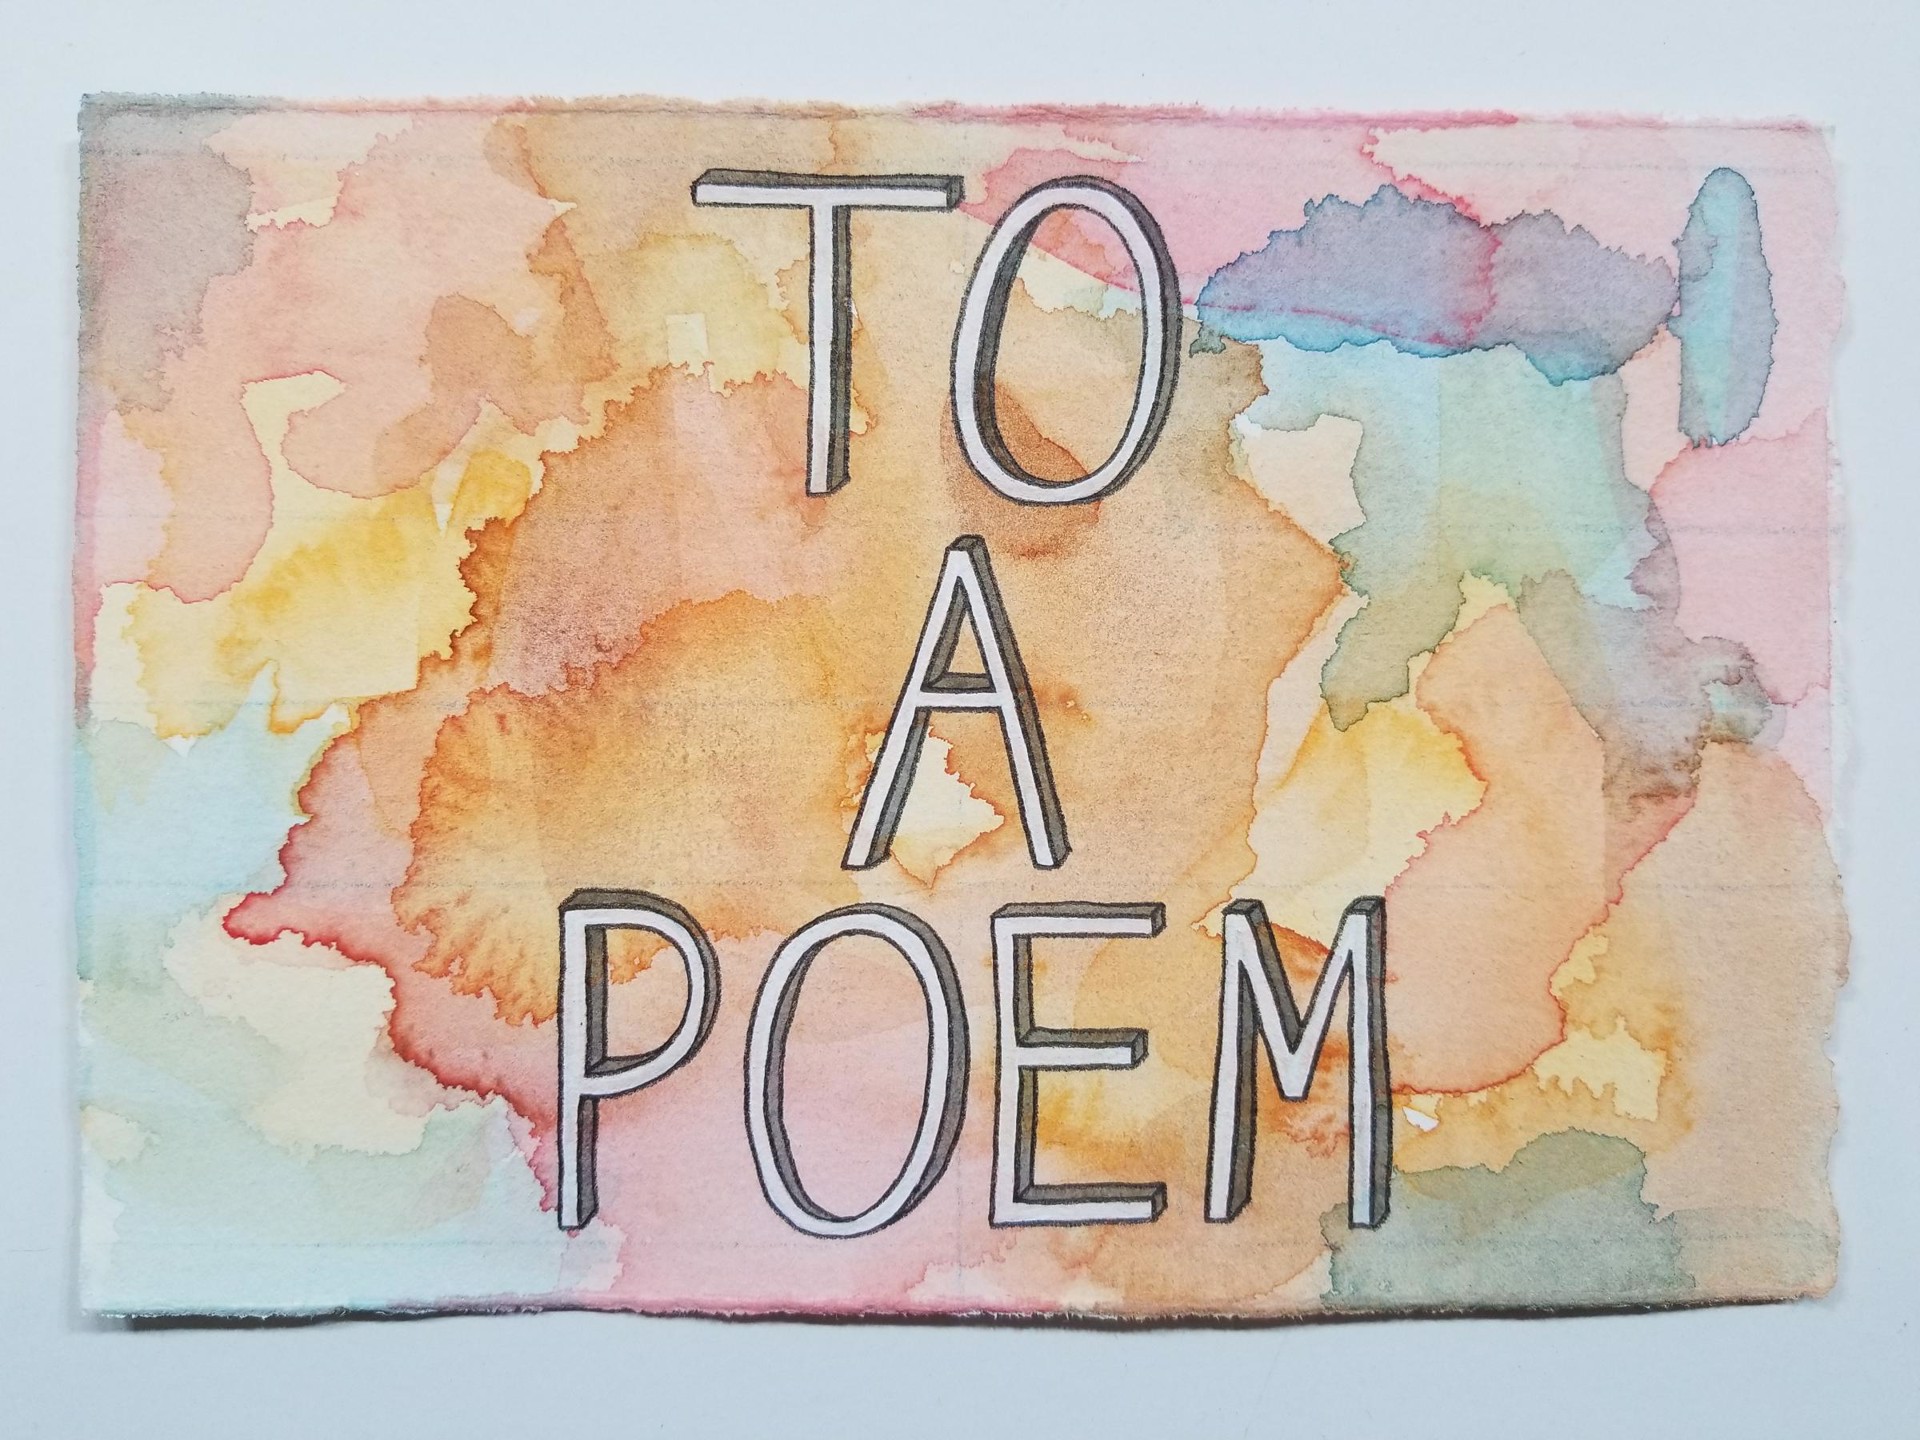 To a Poem by Alex Gingrow